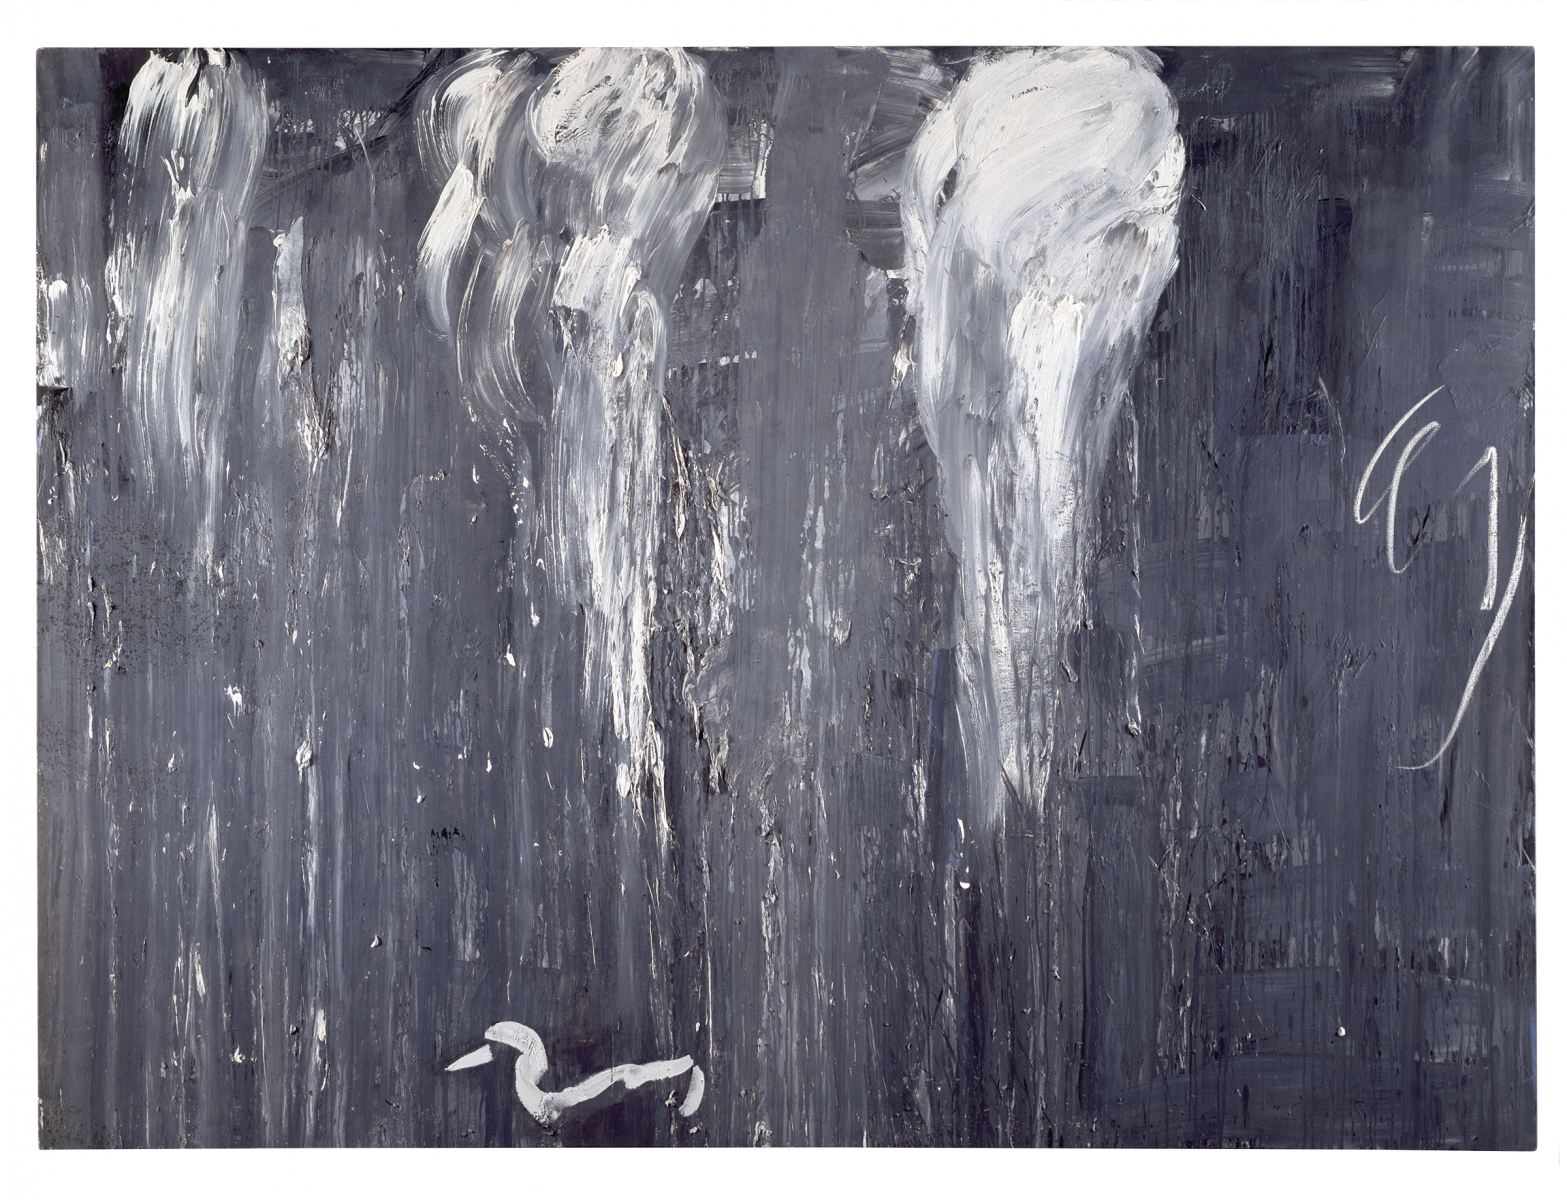 Untitled-93008, 1993, Oil on Canvas, 194x259cm